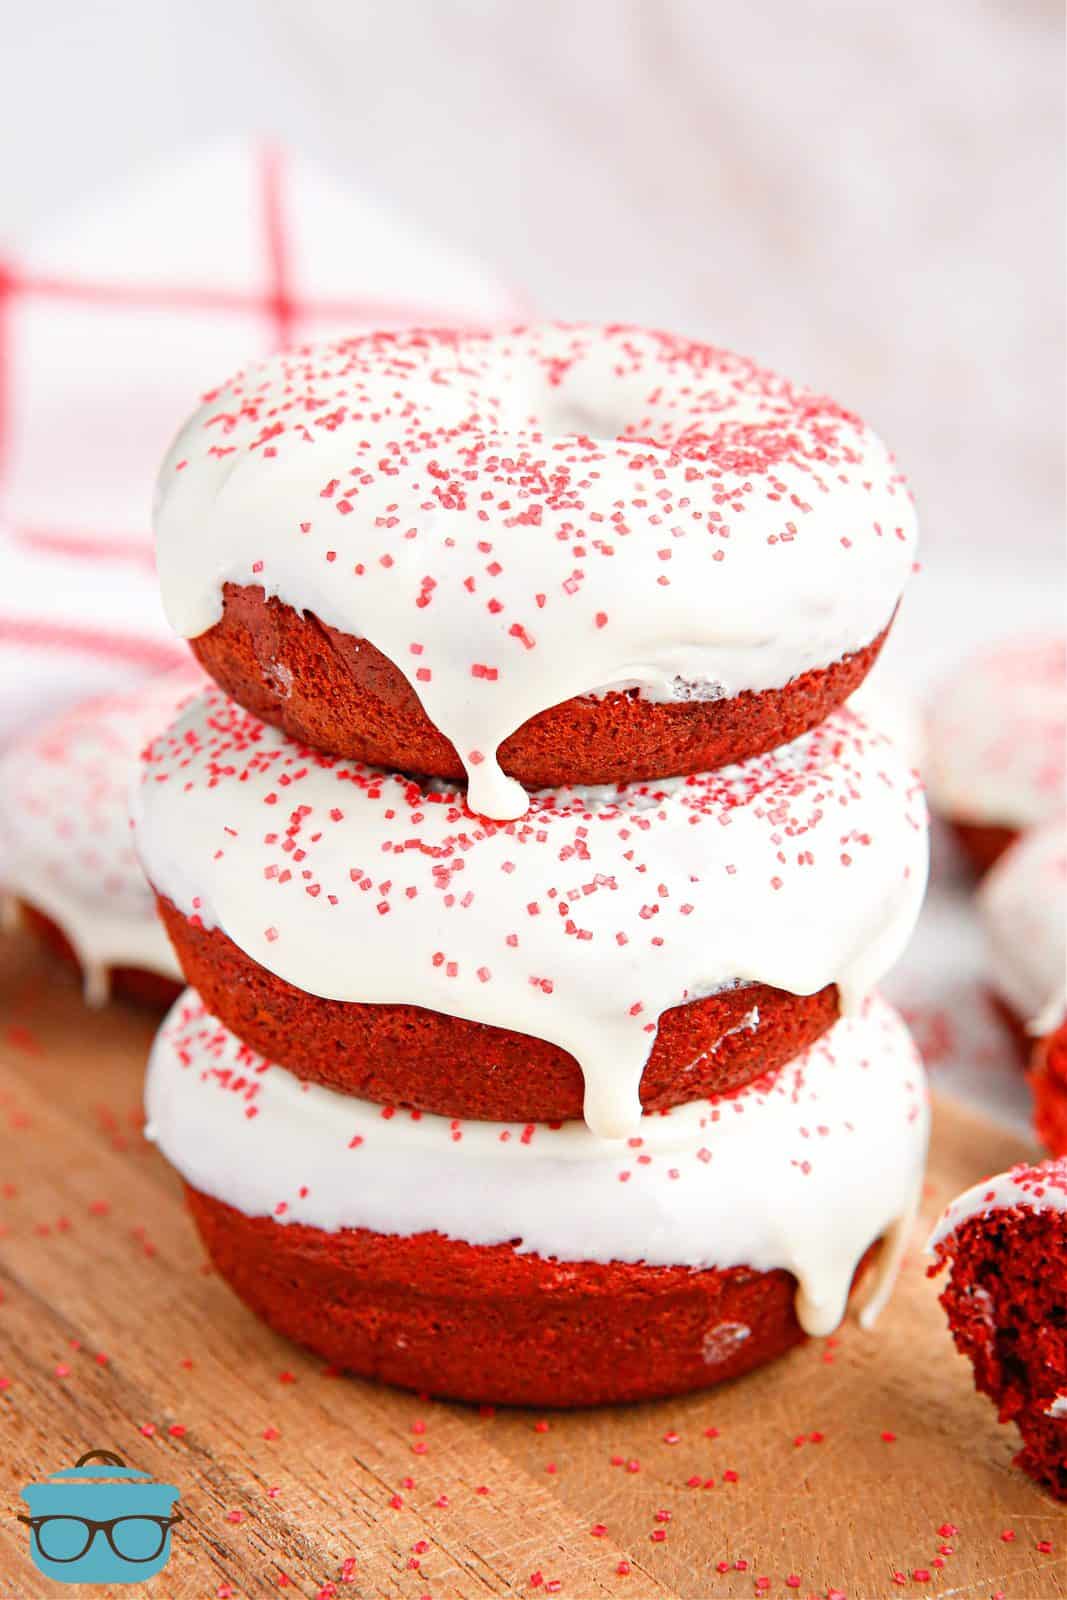 Three stacked and glazed Baked Red Velvet Donuts on cutting board.